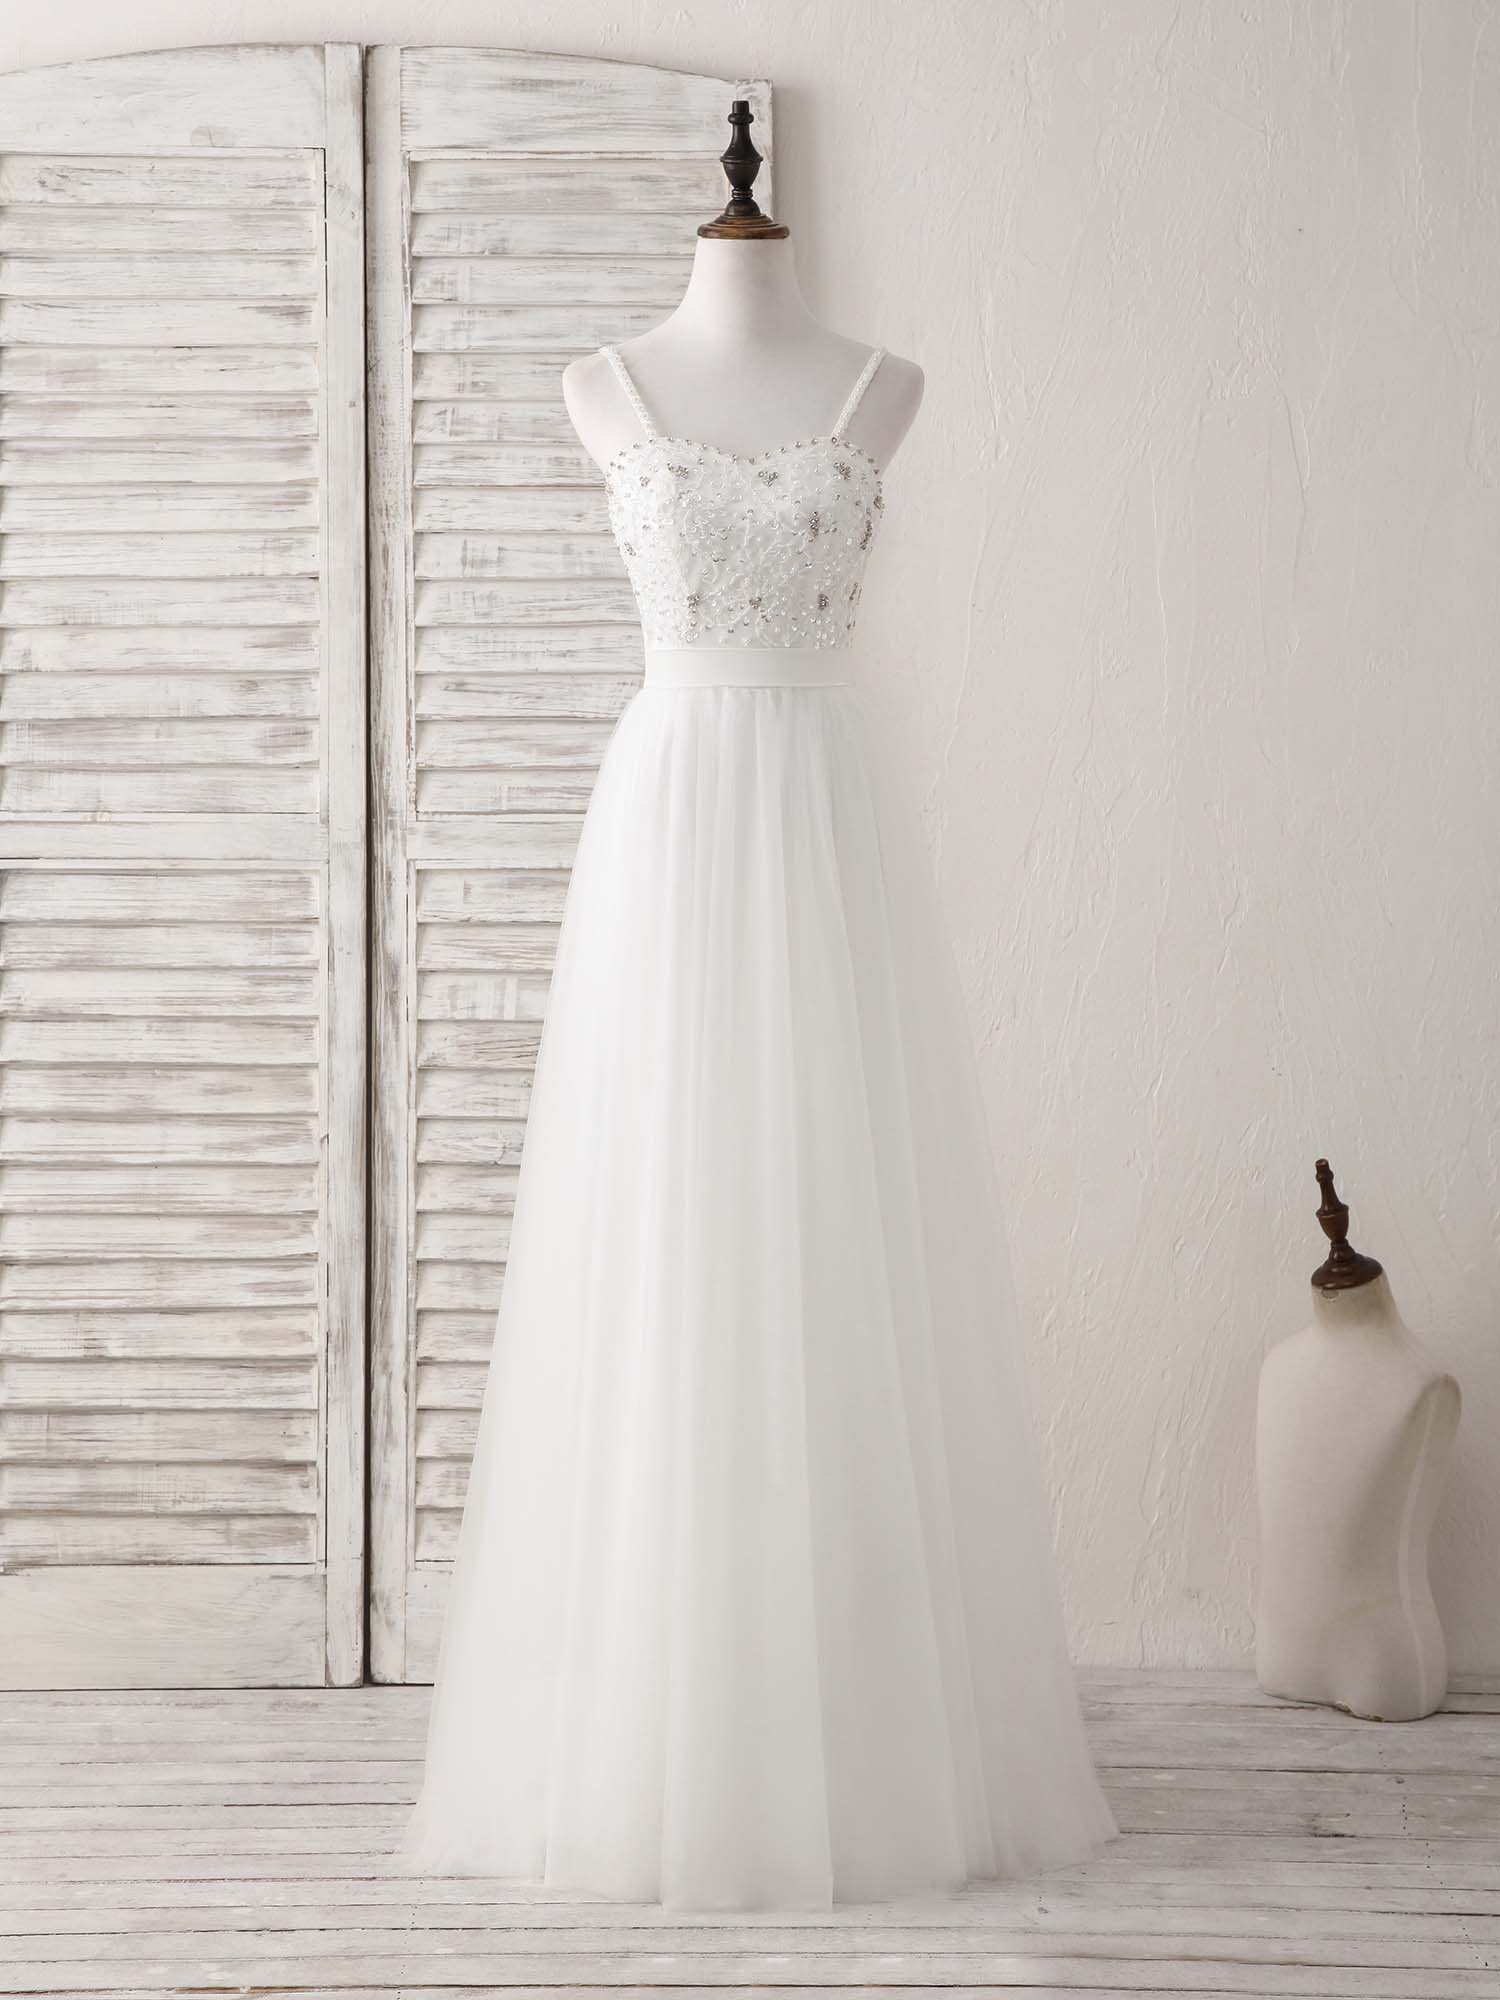 Bridesmaid Dresses Mismatched Neutral, White Sweetheart Neck Tulle Beads Long Prom Dress White Evening Dress